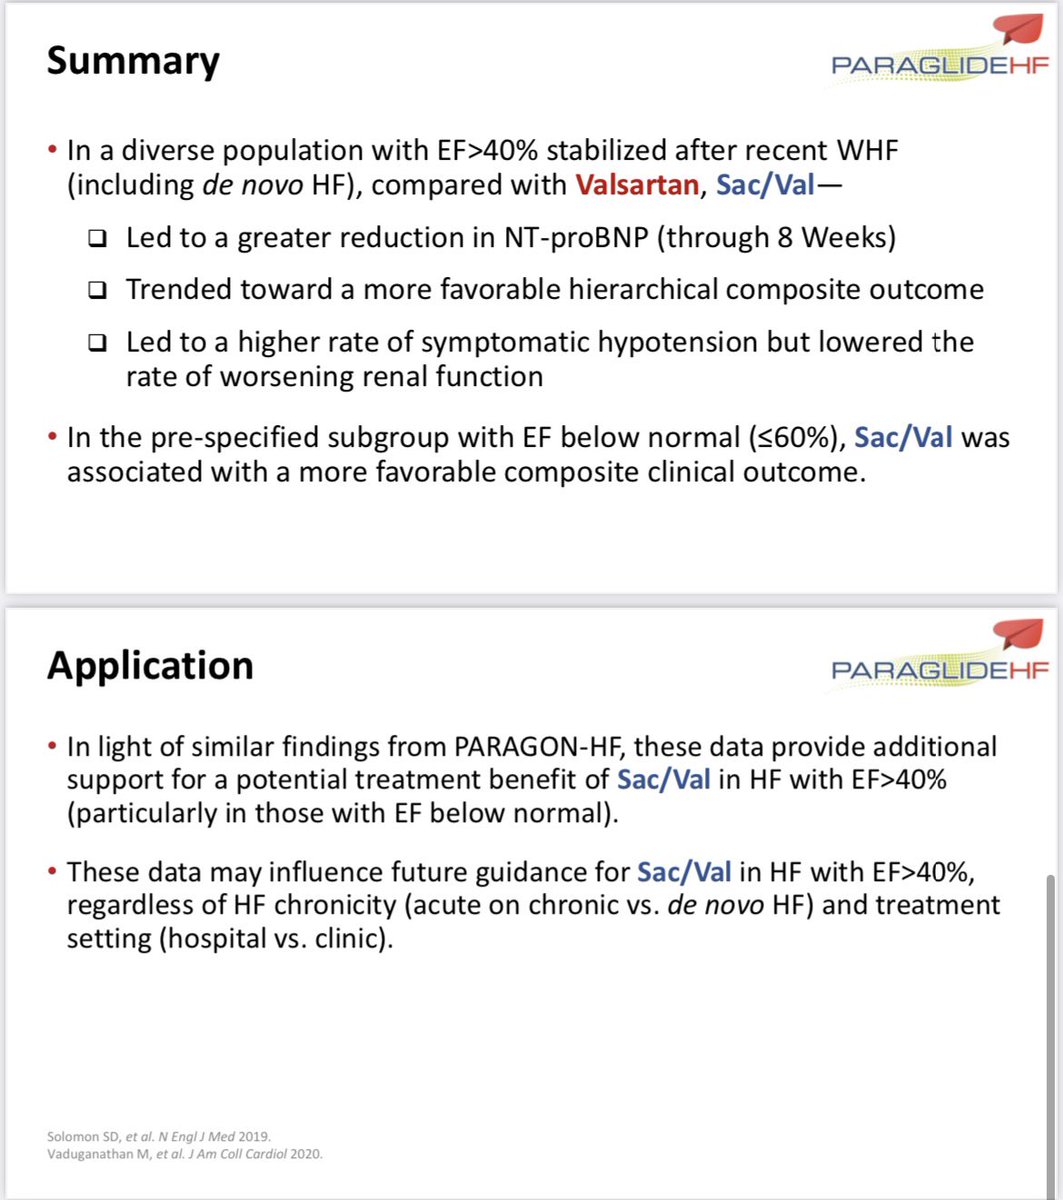 Grateful to share results of PARAGLIDE-HF on behalf of tremendous team effort. Sac/Val vs Val in 466 pts w HF and EF>40% with recent WHF. Positive trial for NTproBNP reduction; CV & renal endpts favored esp in EF<|=60% jacc.org/doi/10.1016/j.…